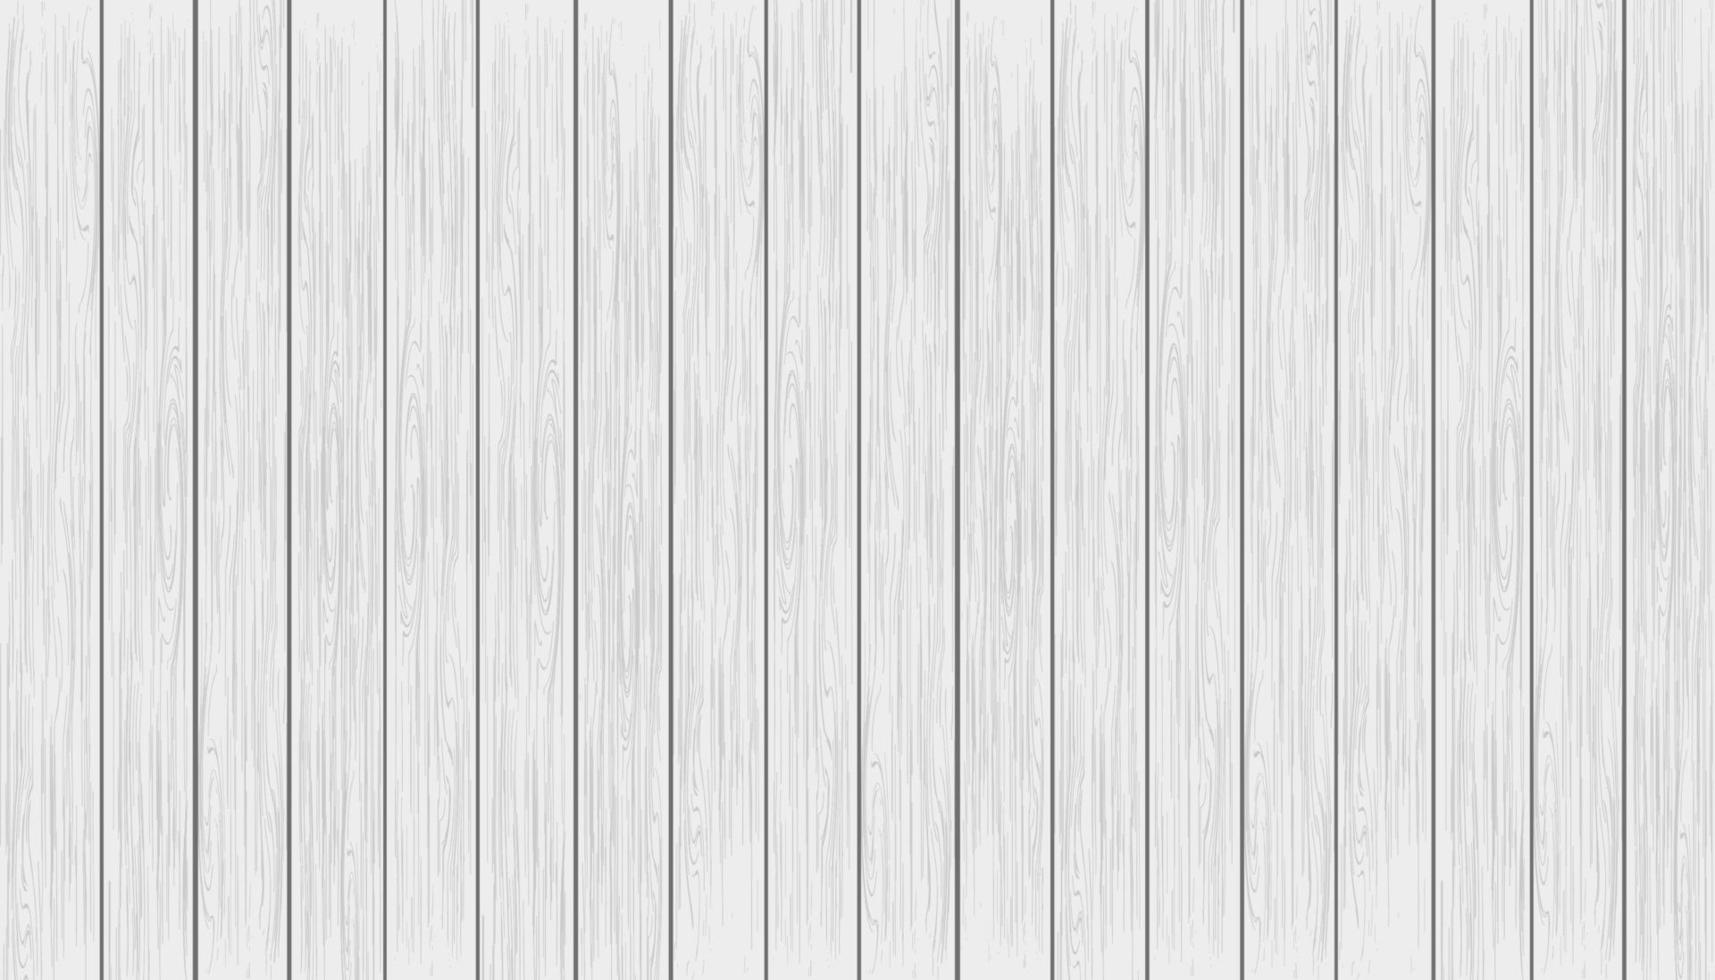 White and Grey wood panel texture for backgrounds. Backdrop banner White washed wooden boards,Vector illustration Table top view, Rustic grayscale plank wallpaper. vector